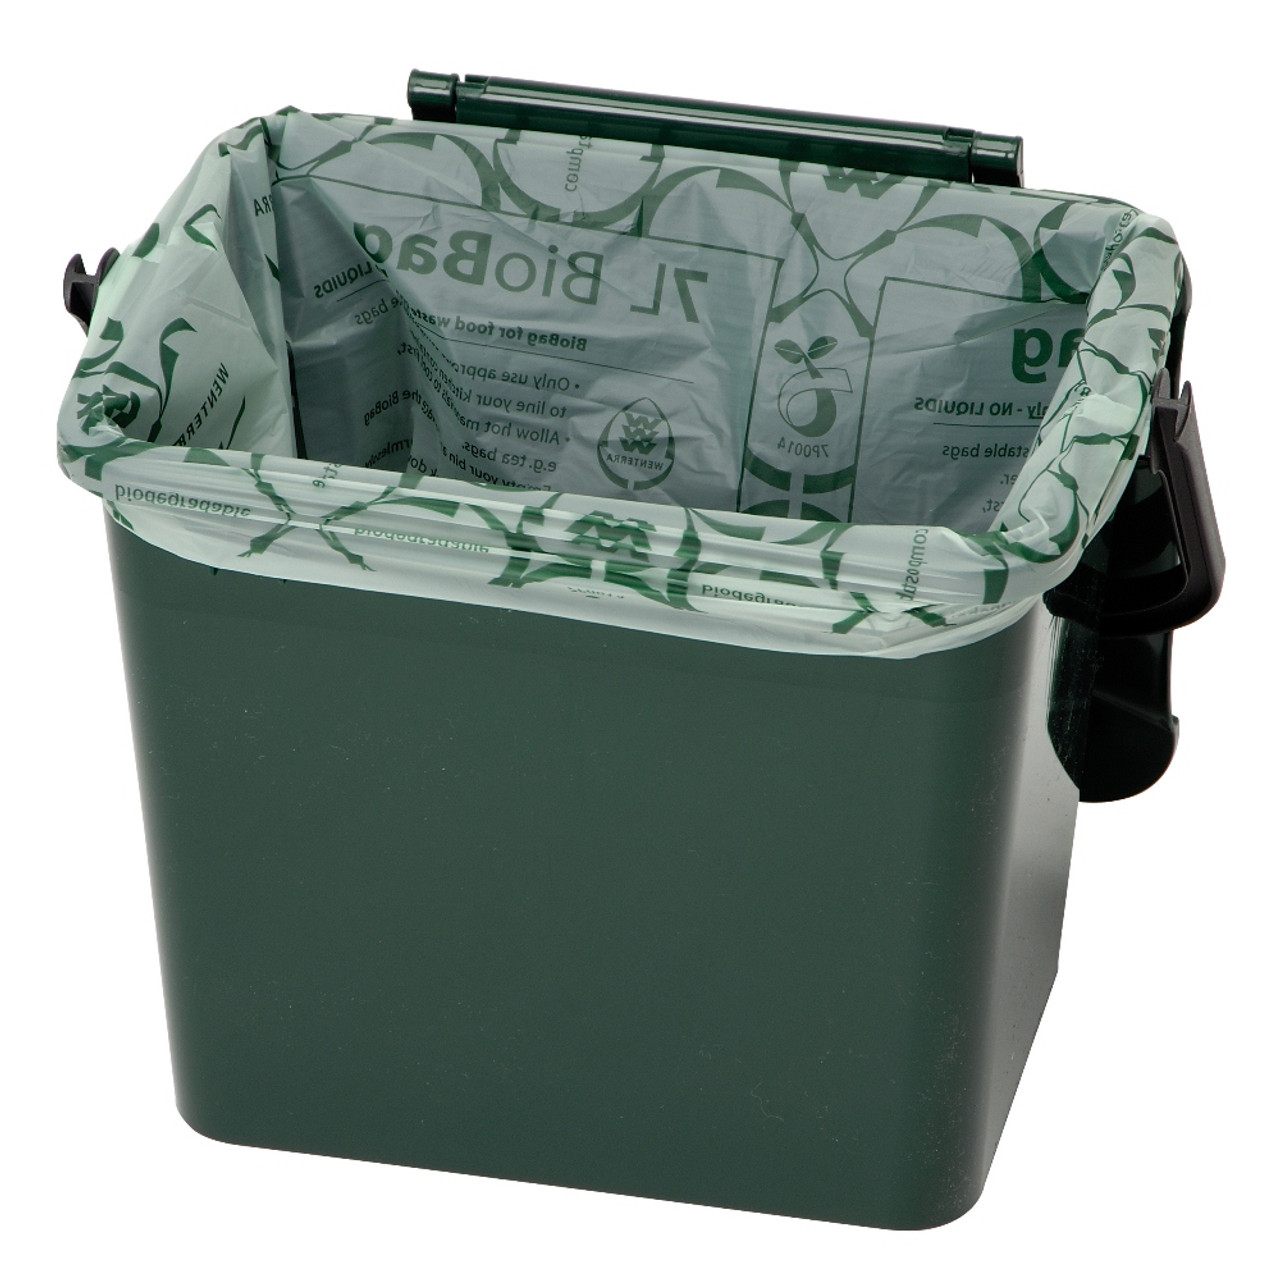 https://cdn11.bigcommerce.com/s-y54ozdxwxj/images/stencil/1280x1280/products/5765/3980/7_litre_caddy_moss_green_liner_wb_gd_1__47923.1533655749.jpg?c=2